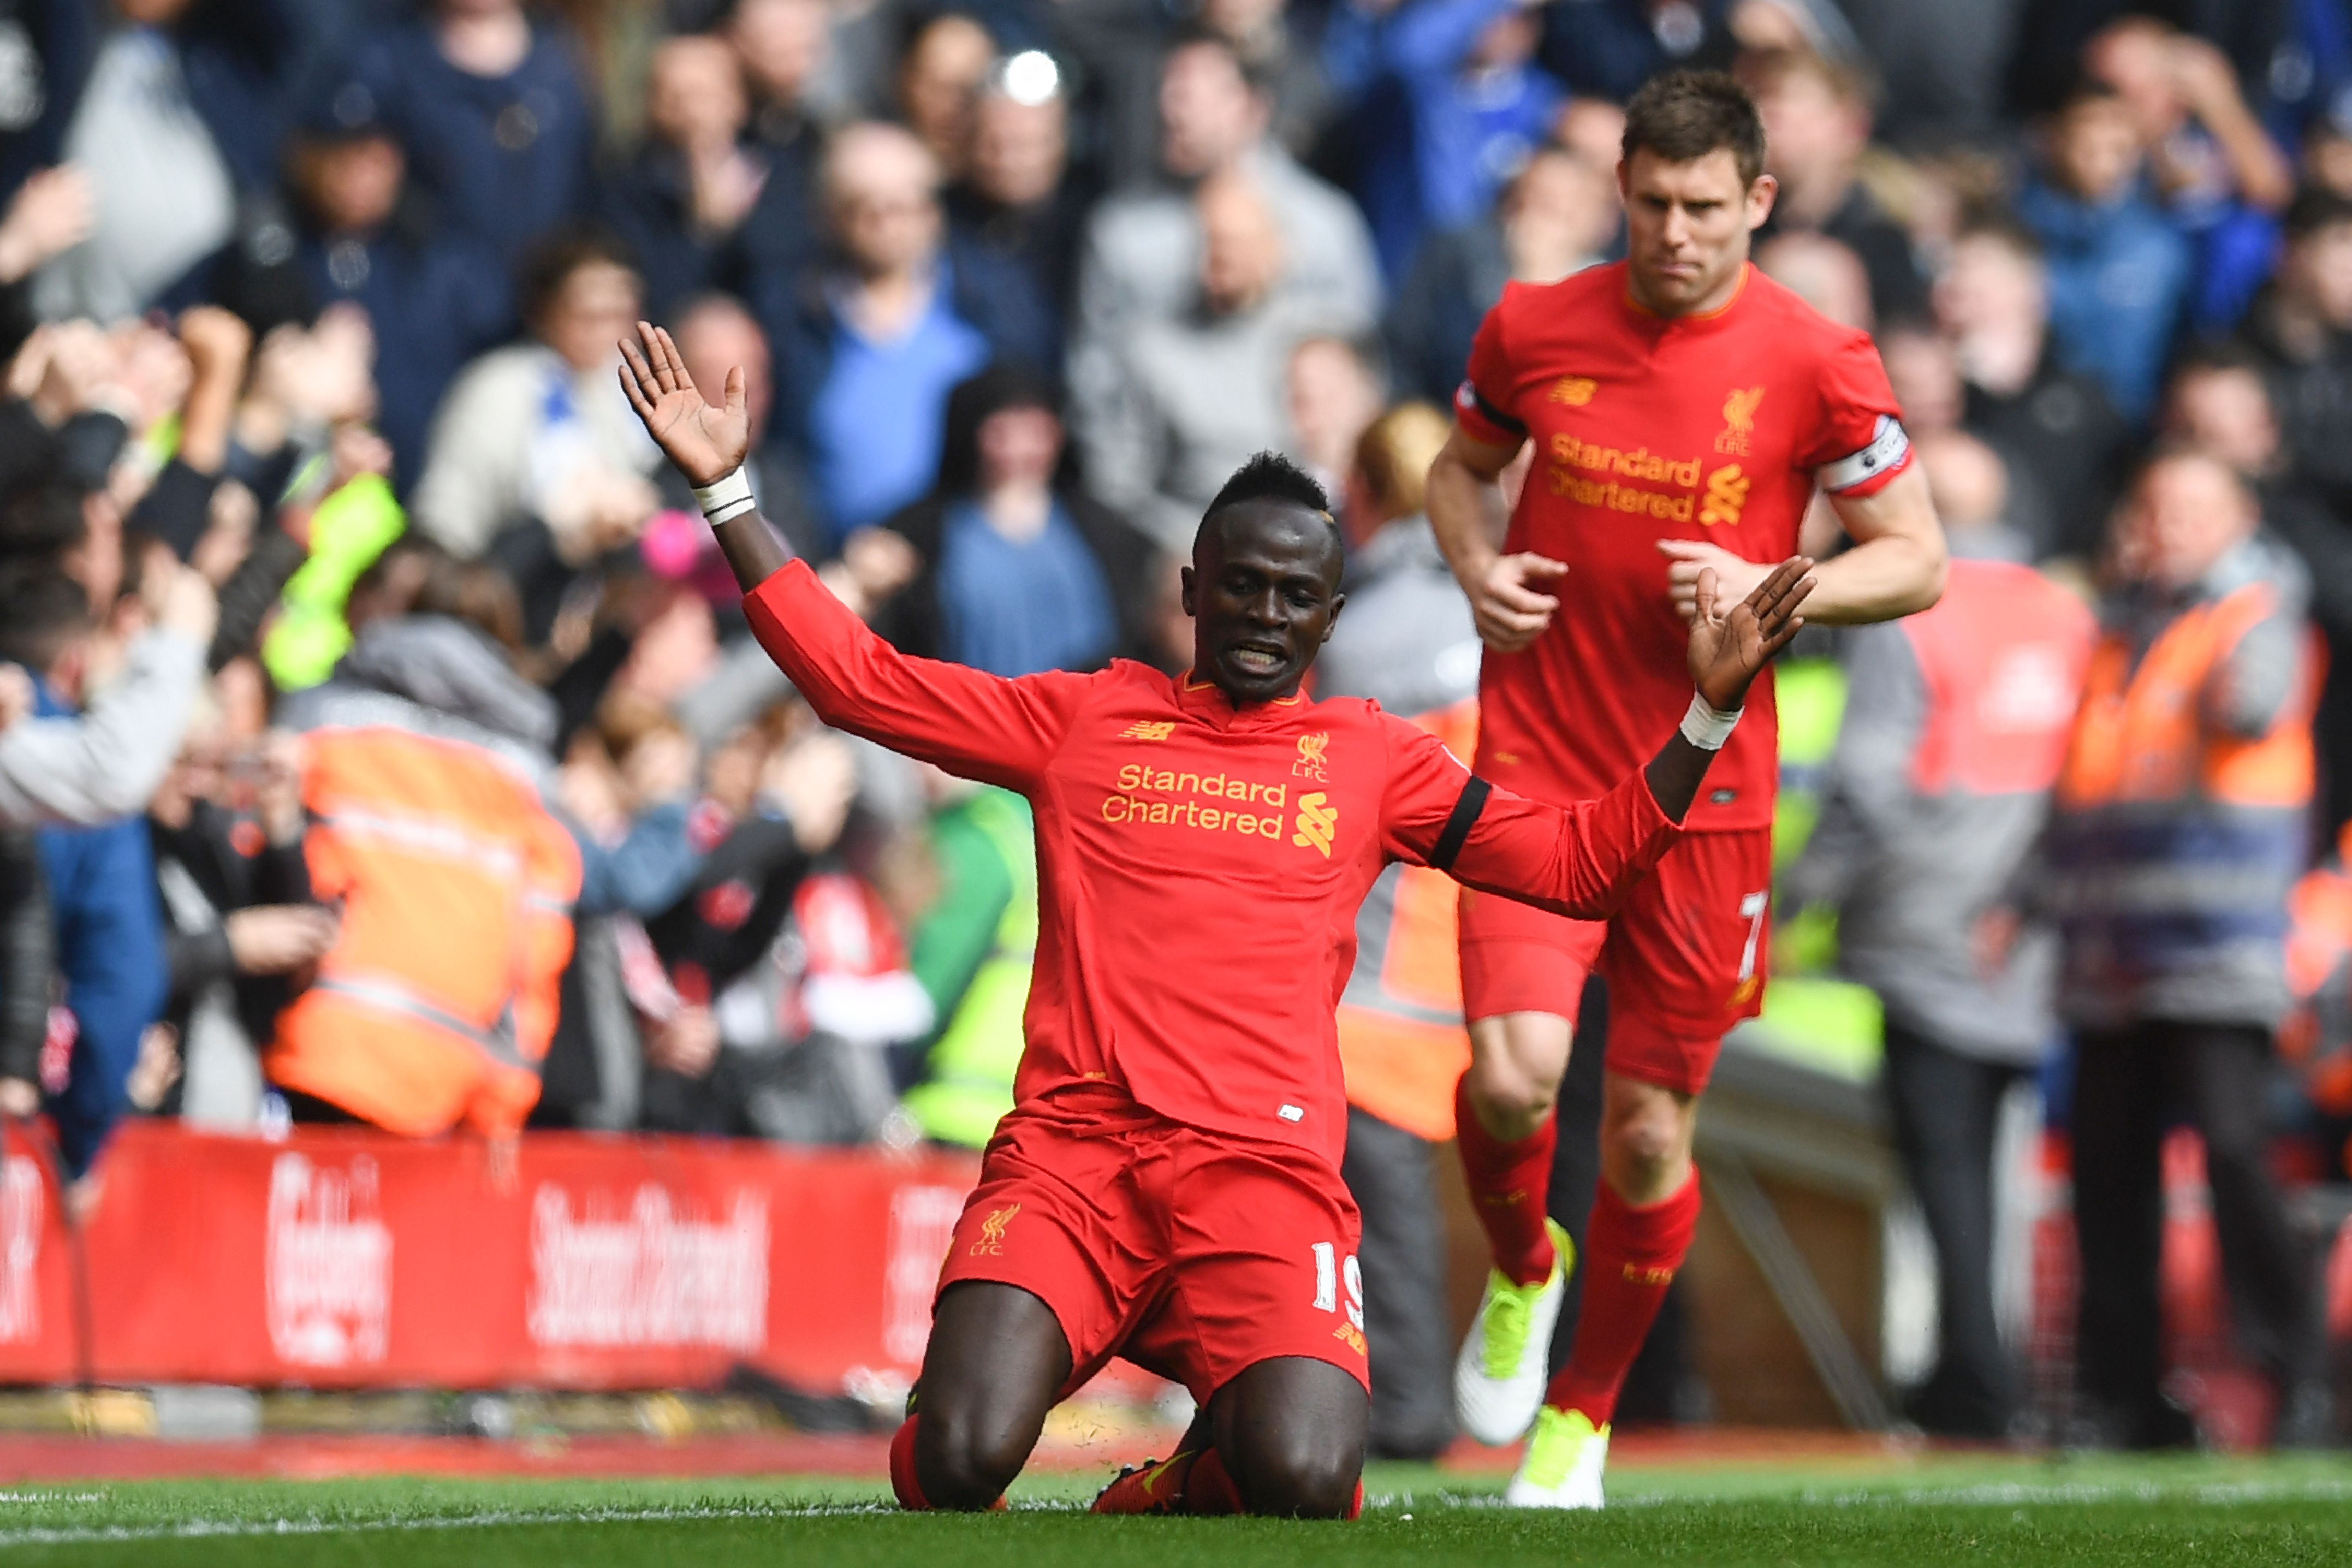 Liverpool's Senegalese midfielder Sadio Mane celebrates after scoring the opening goal of the English Premier League football match between Liverpool and Everton at Anfield in Liverpool, north west England on April 1, 2017. / AFP PHOTO / Paul ELLIS / RESTRICTED TO EDITORIAL USE. No use with unauthorized audio, video, data, fixture lists, club/league logos or 'live' services. Online in-match use limited to 75 images, no video emulation. No use in betting, games or single club/league/player publications.  /         (Photo credit should read PAUL ELLIS/AFP/Getty Images)